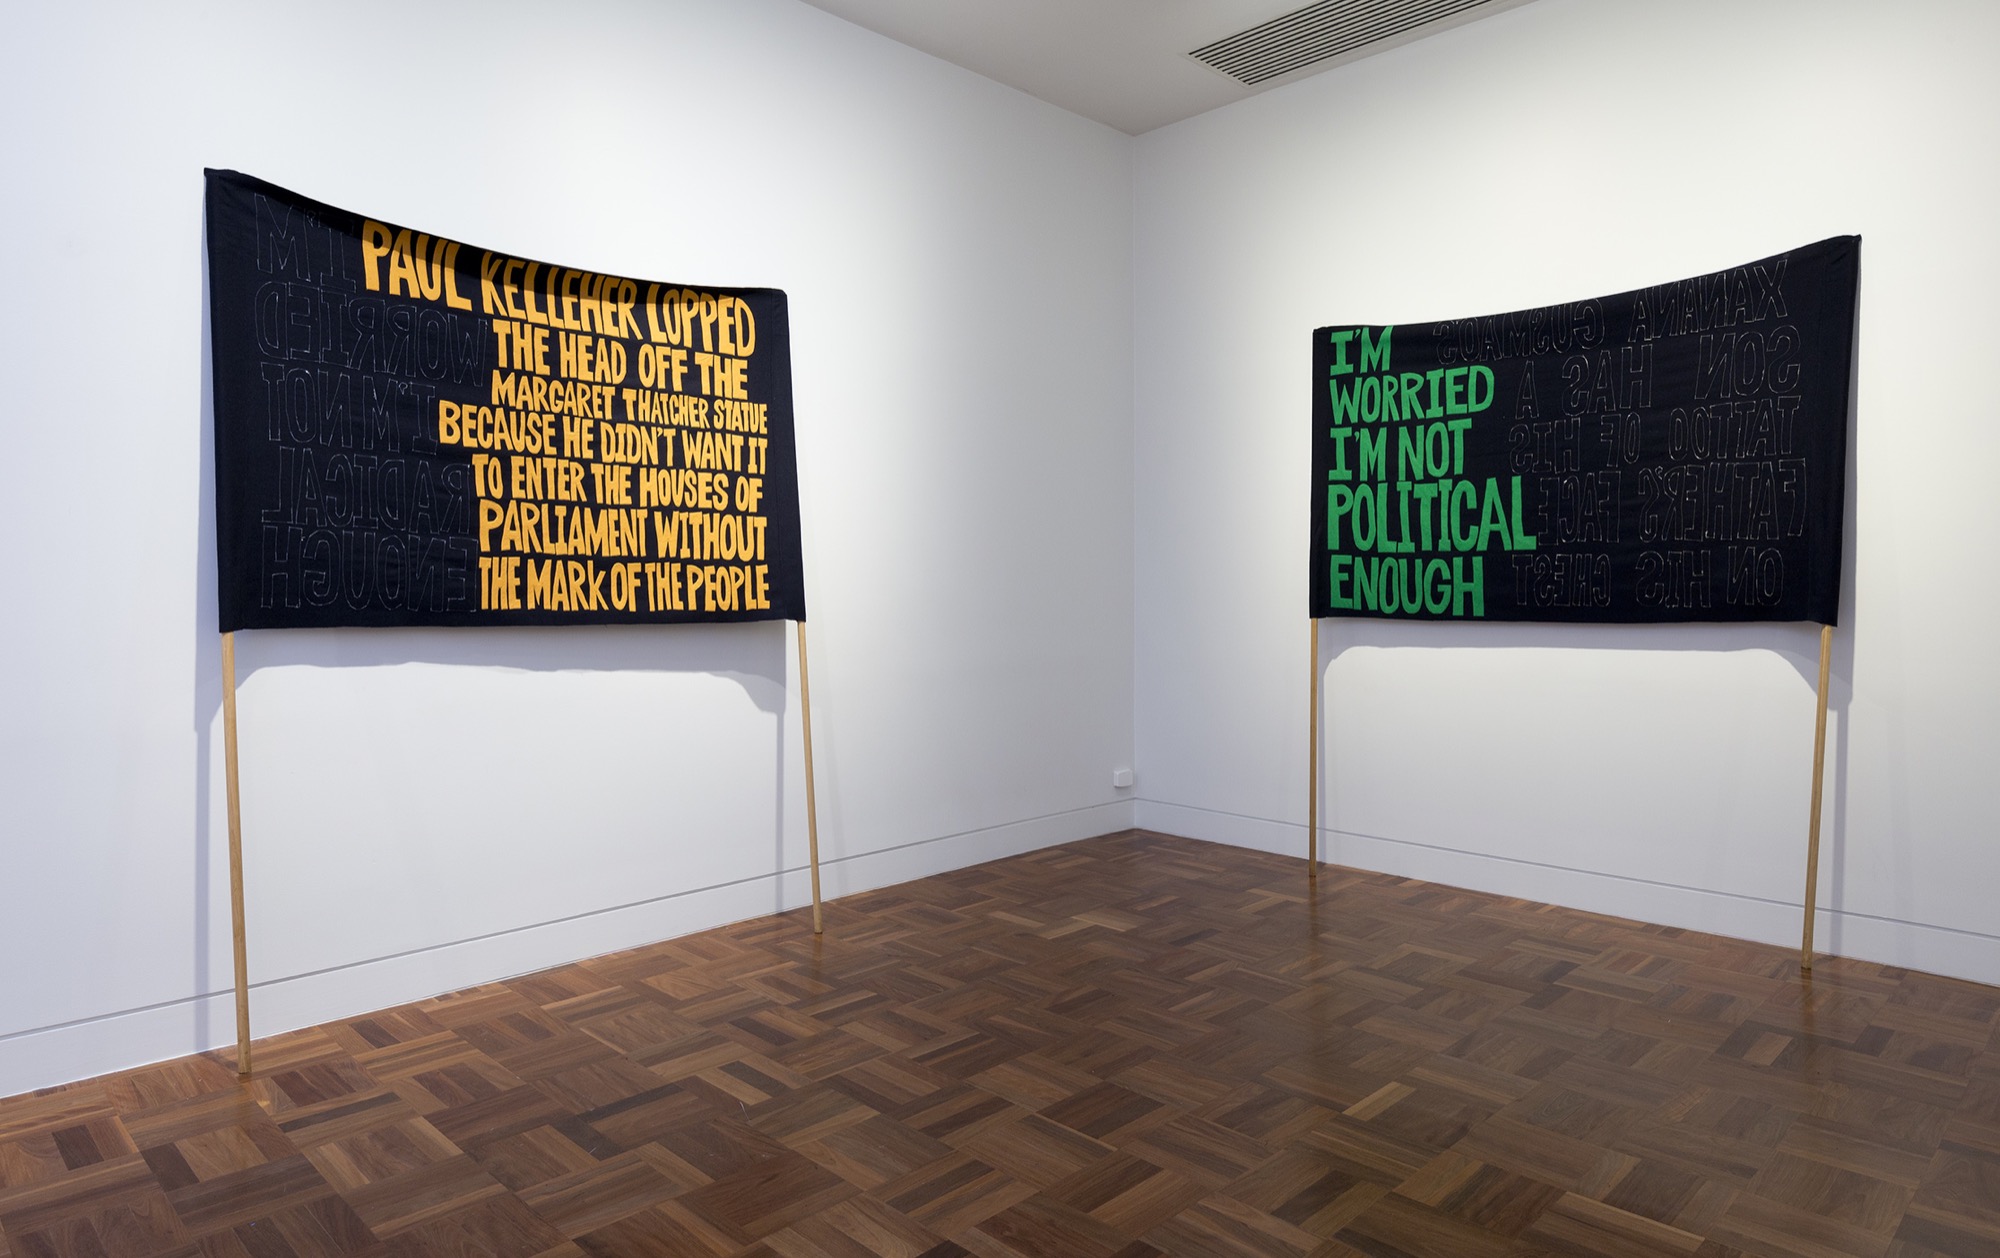 Raquel Ormella, <em>I Hope You Get This</em>, installation view: I’m Worried This Will Become a Slogan (Xanana Gusmao), 1999–2009, double-sided banner, sewn wool and felt, 128 x 202 cm; I’m Worried This Will Become a Slogan (Paul Kelleher), 1999–2009. Courtesy the artist and Milani Gallery, Brisbane. Photo: Christian Capurro.